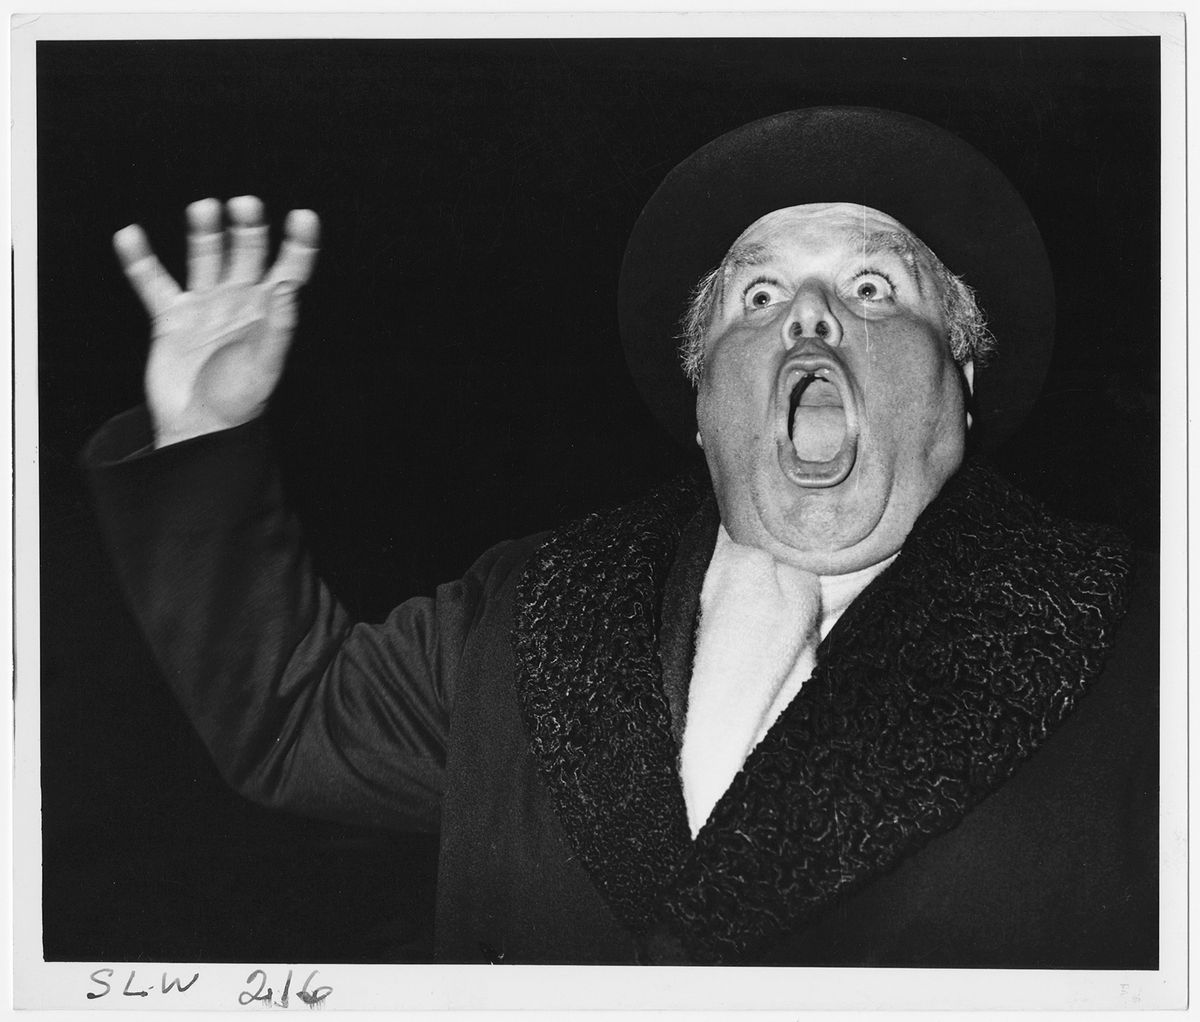 Weegee’s 1963 photograph of the actor Peter Bull as the Russian ambassador during the filming of Dr Strangelove © Getty Images/International Center of Photography